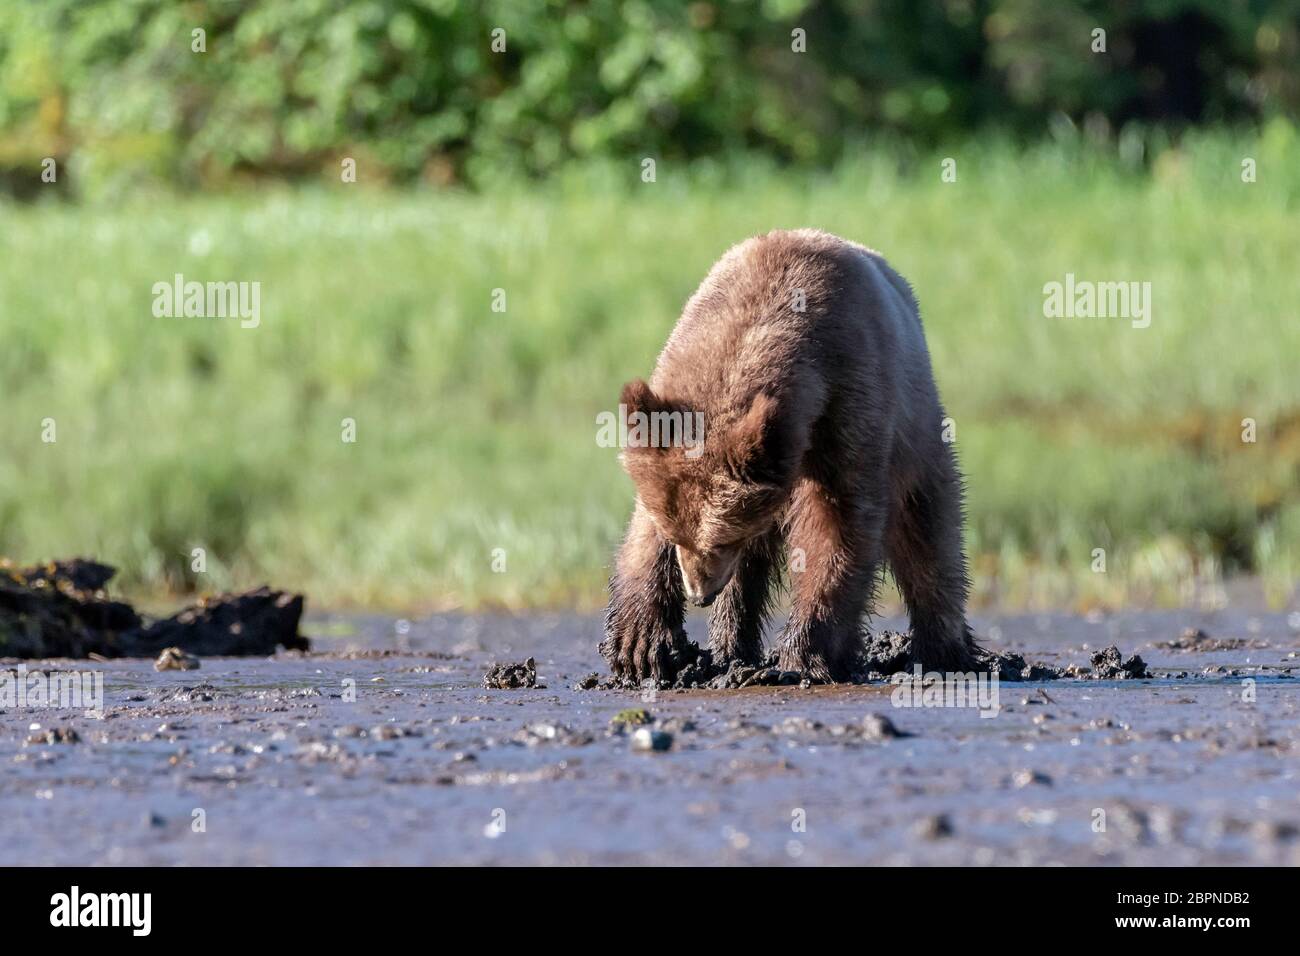 Large grizzly bear digging for clams at low tide, Khutzeymateen Inlet, BC Stock Photo